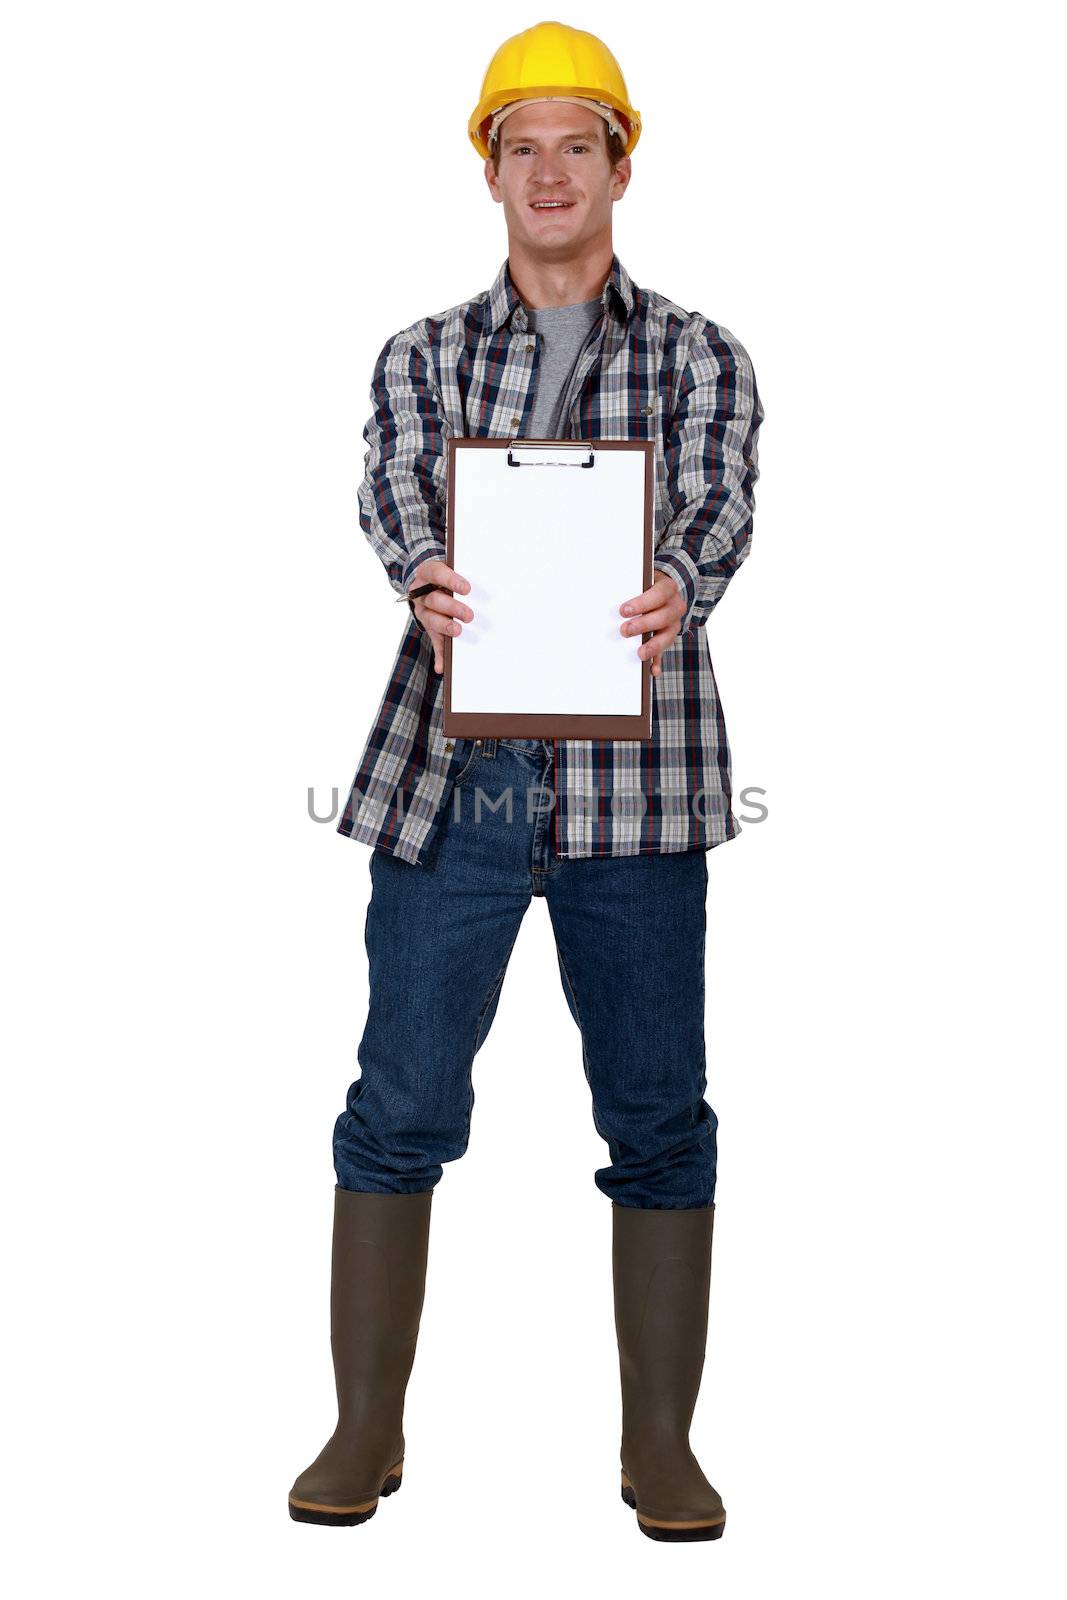 Construction worker holding clip-board by phovoir